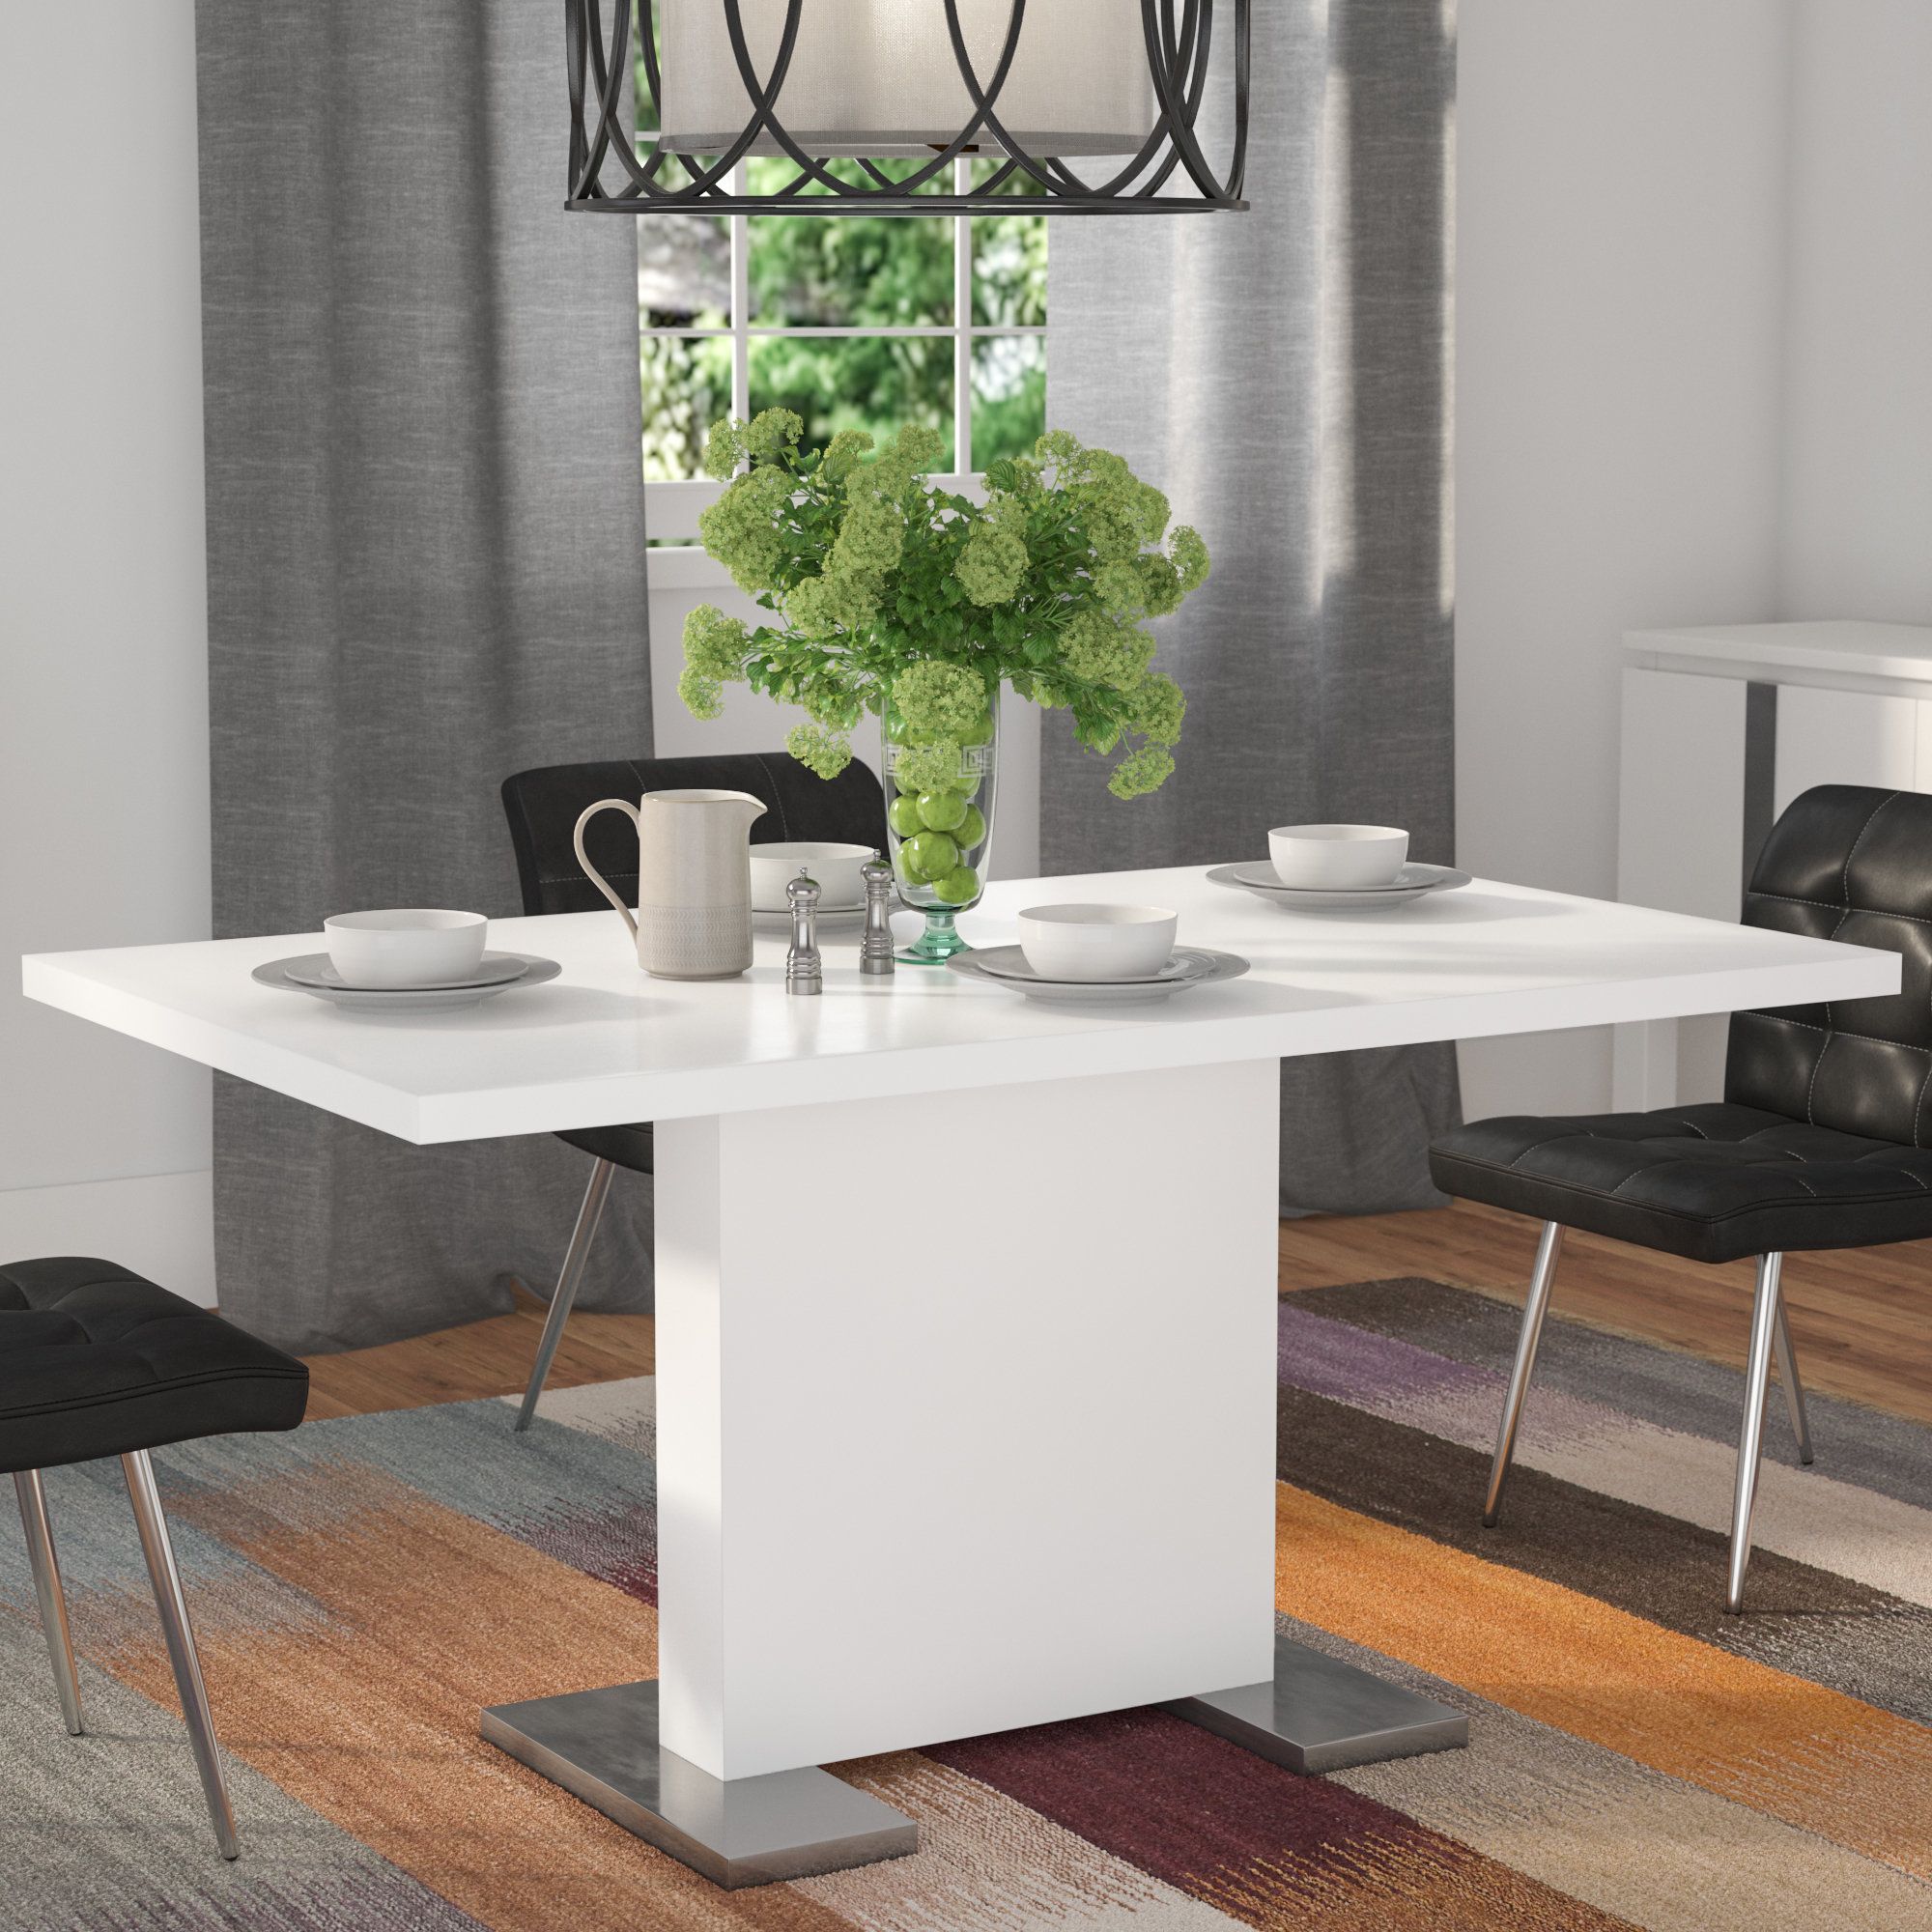 Moorhead Dining Table Throughout Recent Moorehead 3 Piece Counter Height Dining Sets (View 11 of 20)